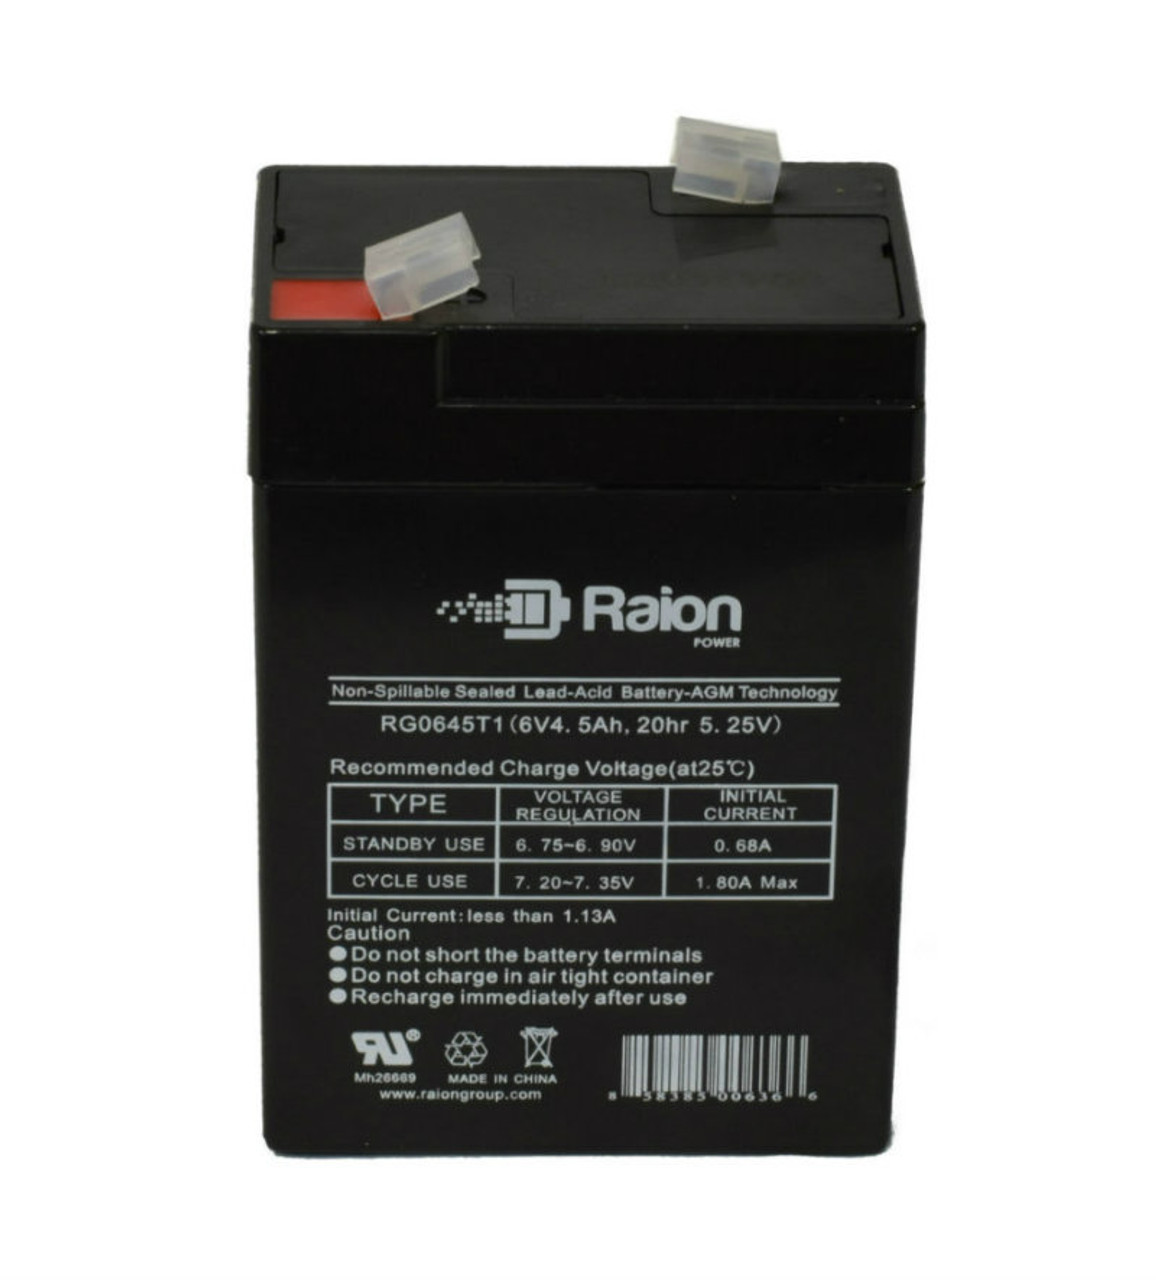 Raion Power RG0645T1 Replacement Battery Cartridge for Sonnenschein LCR6V5P